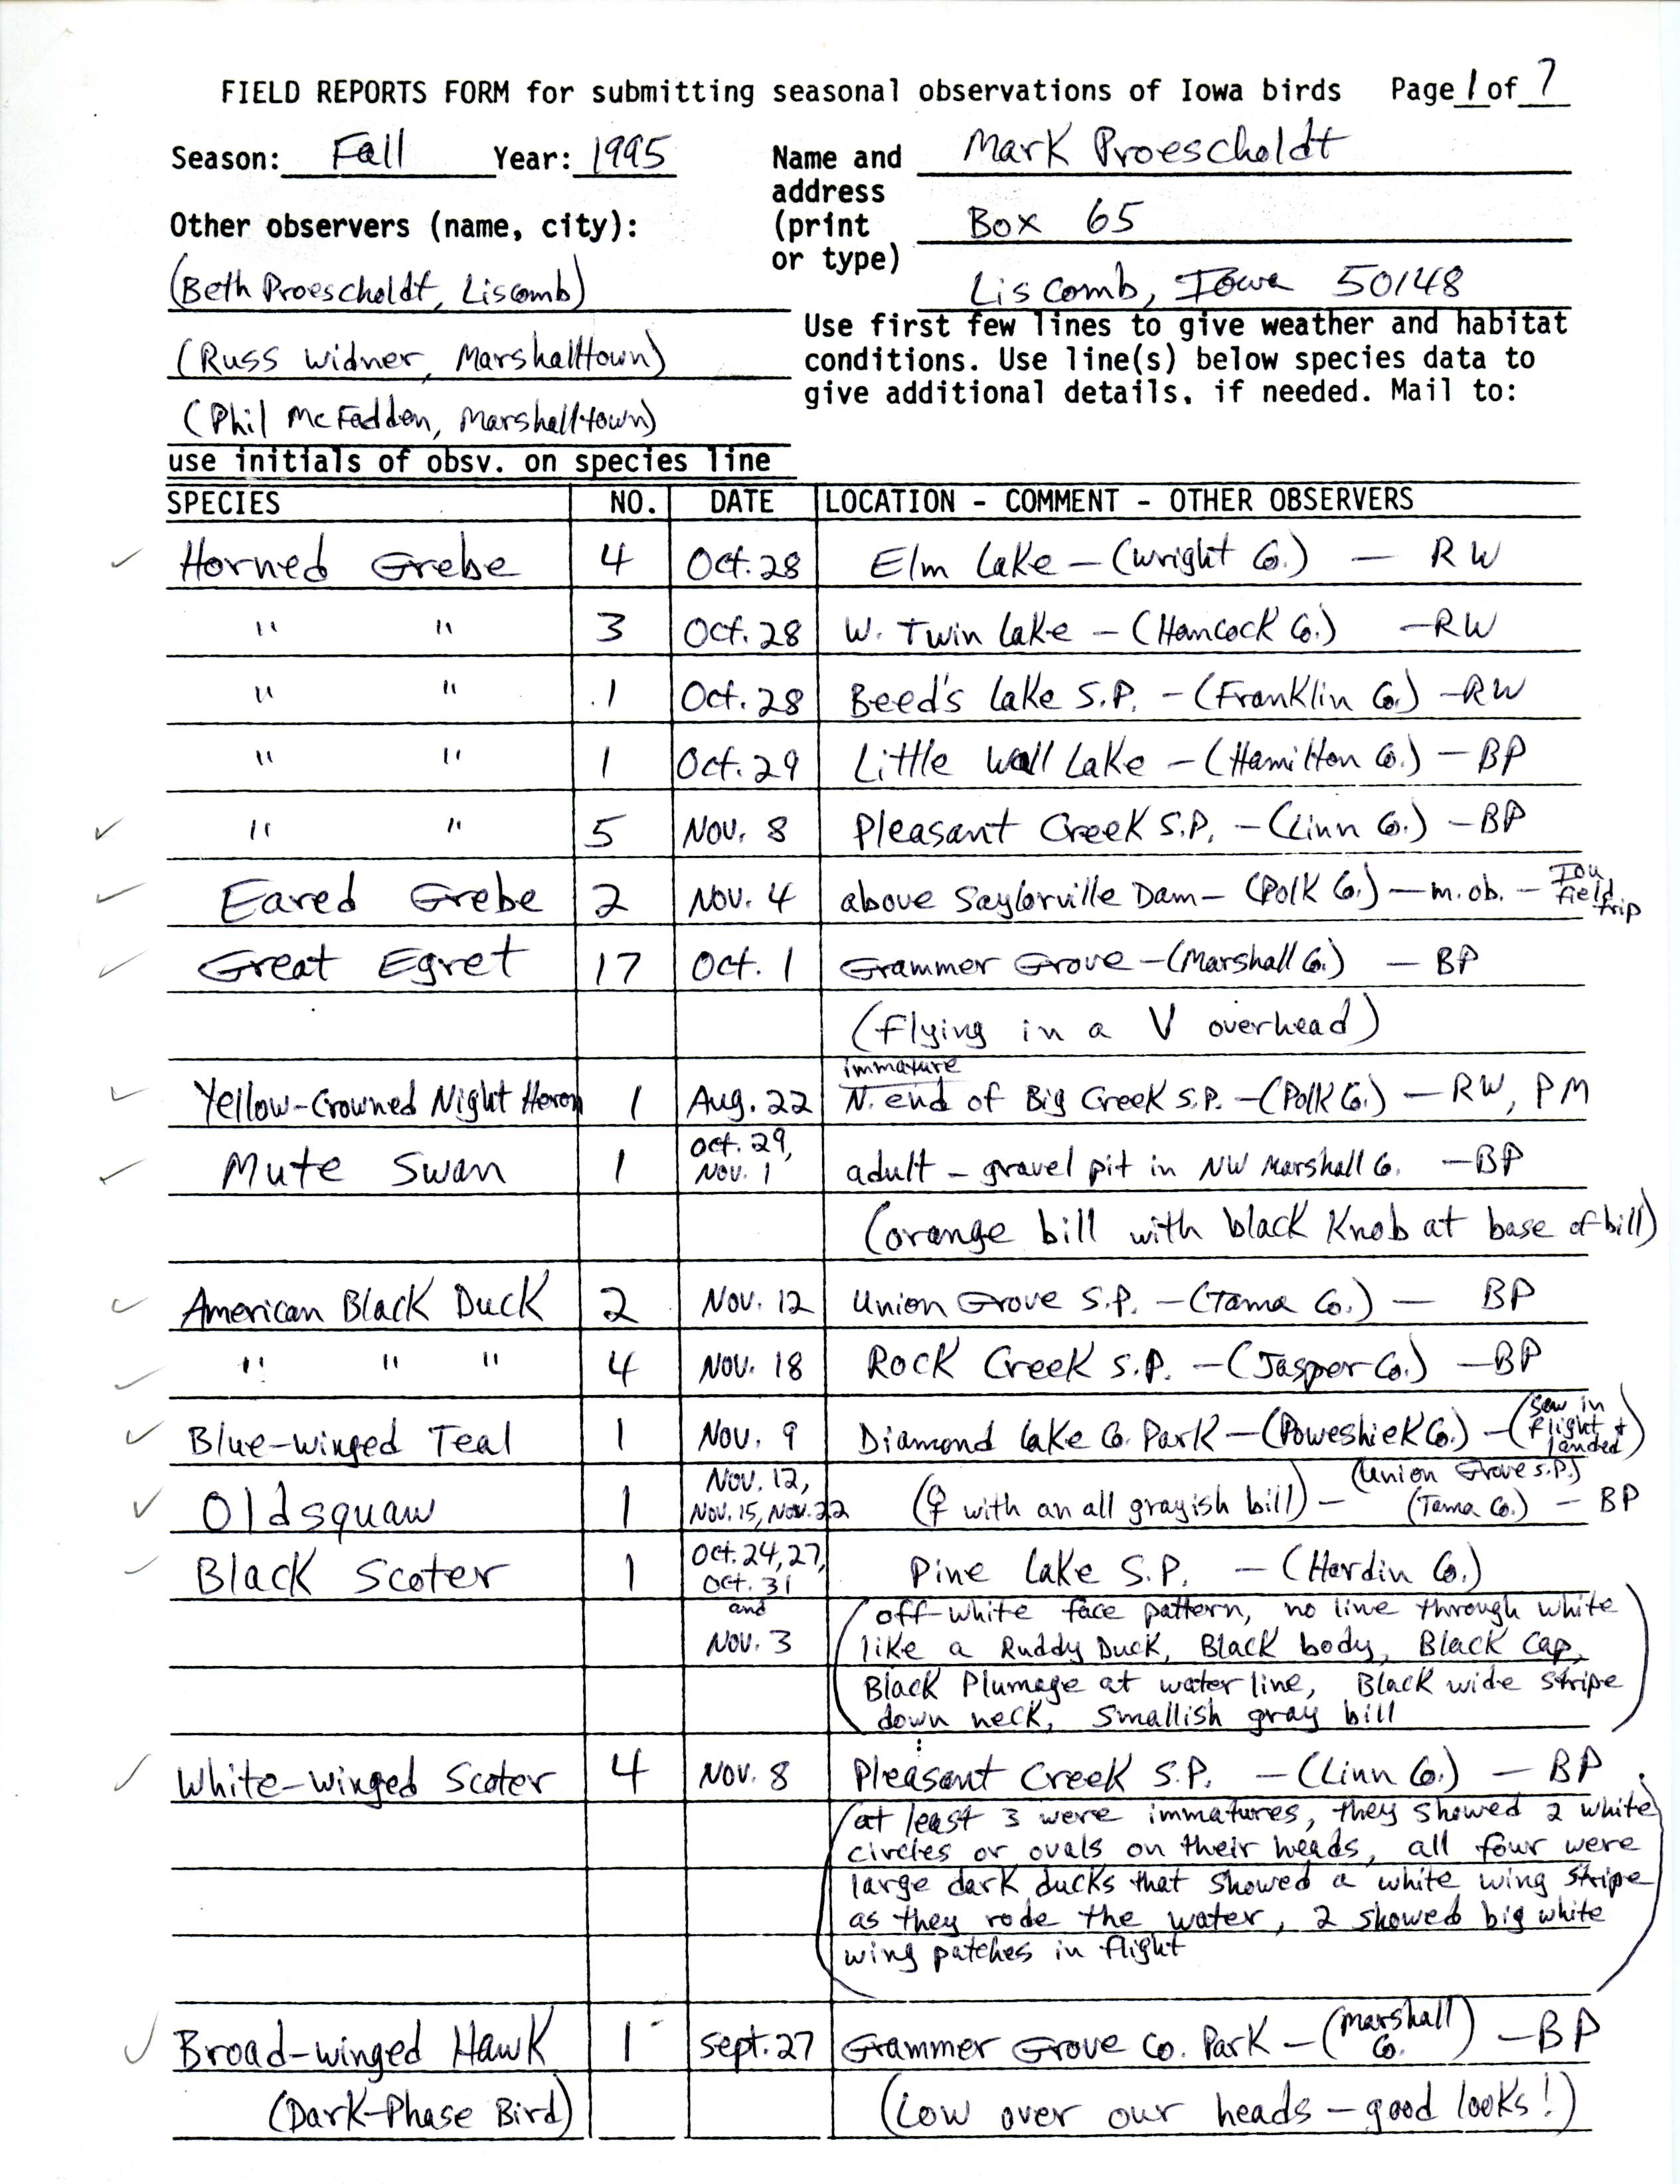 Field reports form for submitting seasonal observations of Iowa birds, Mark Proescholdt, fall 1995